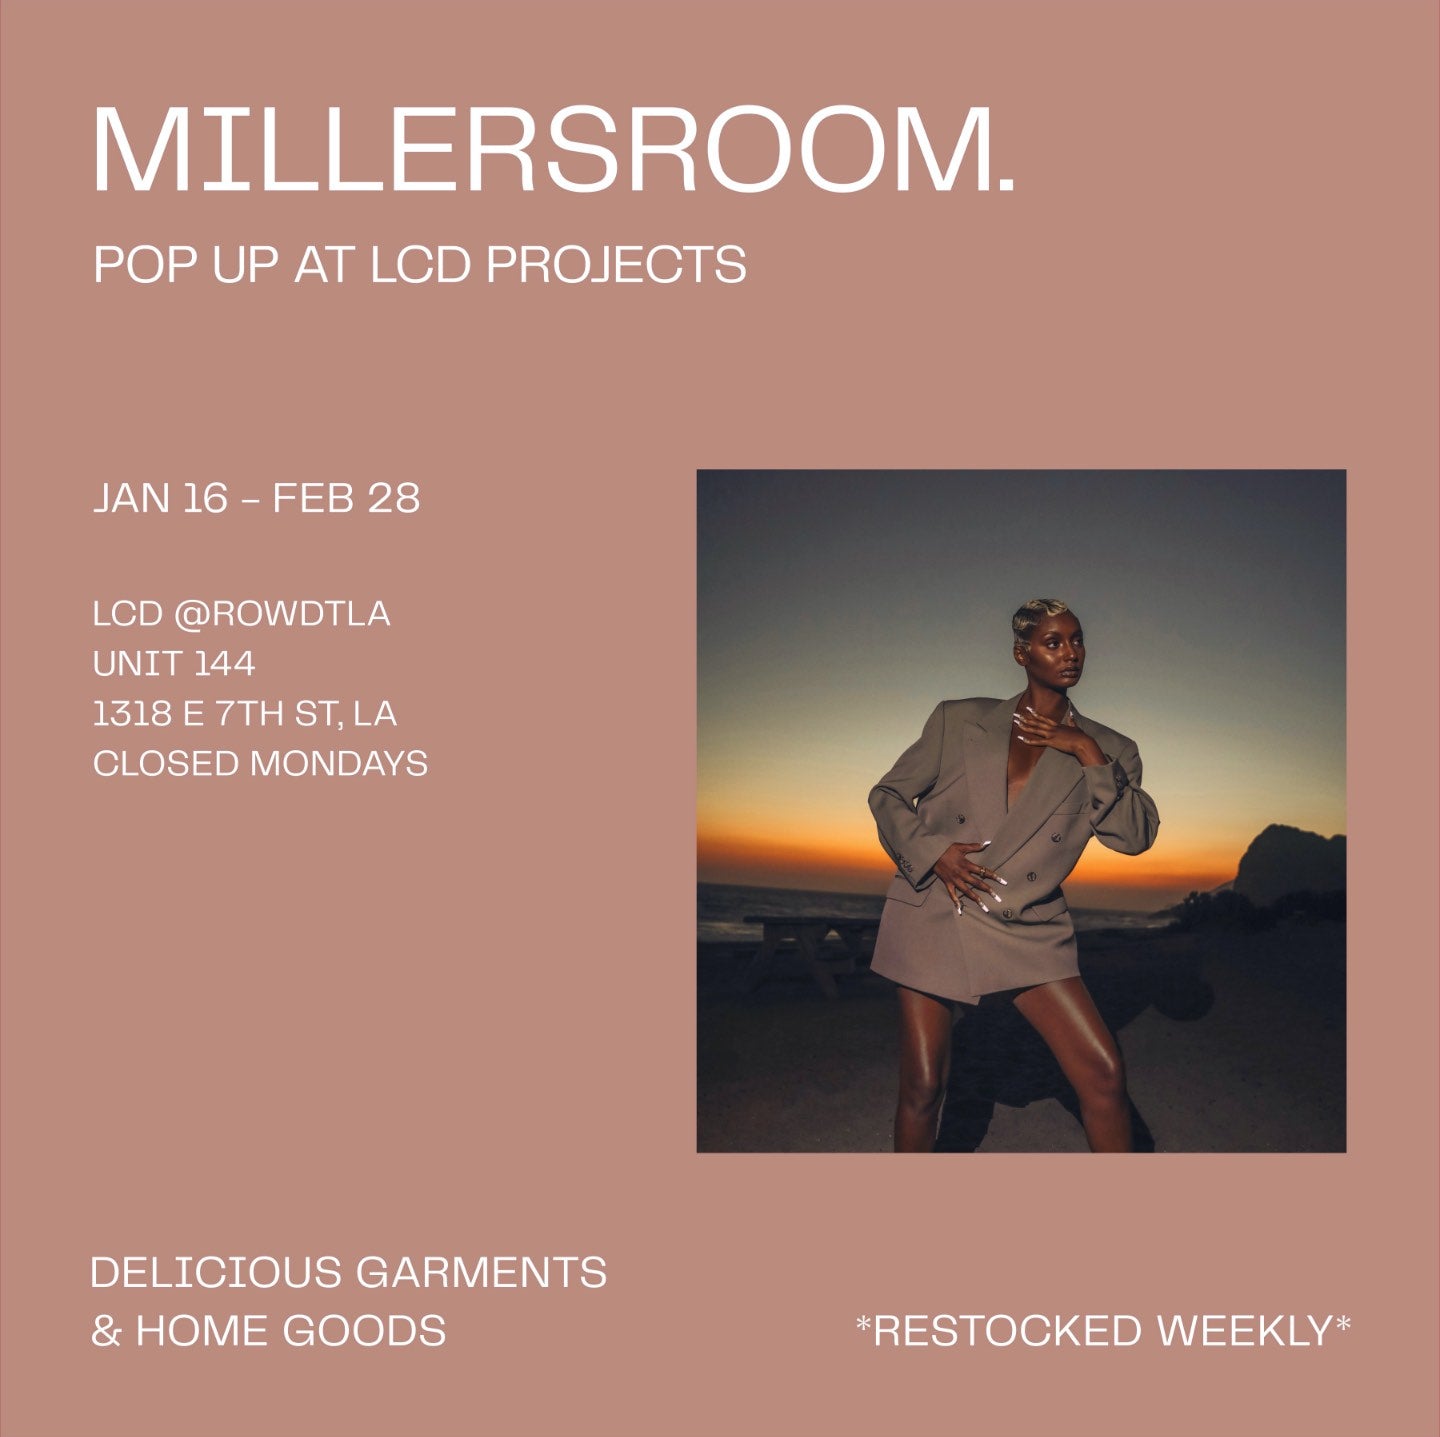 LCD Projects: Millersroom